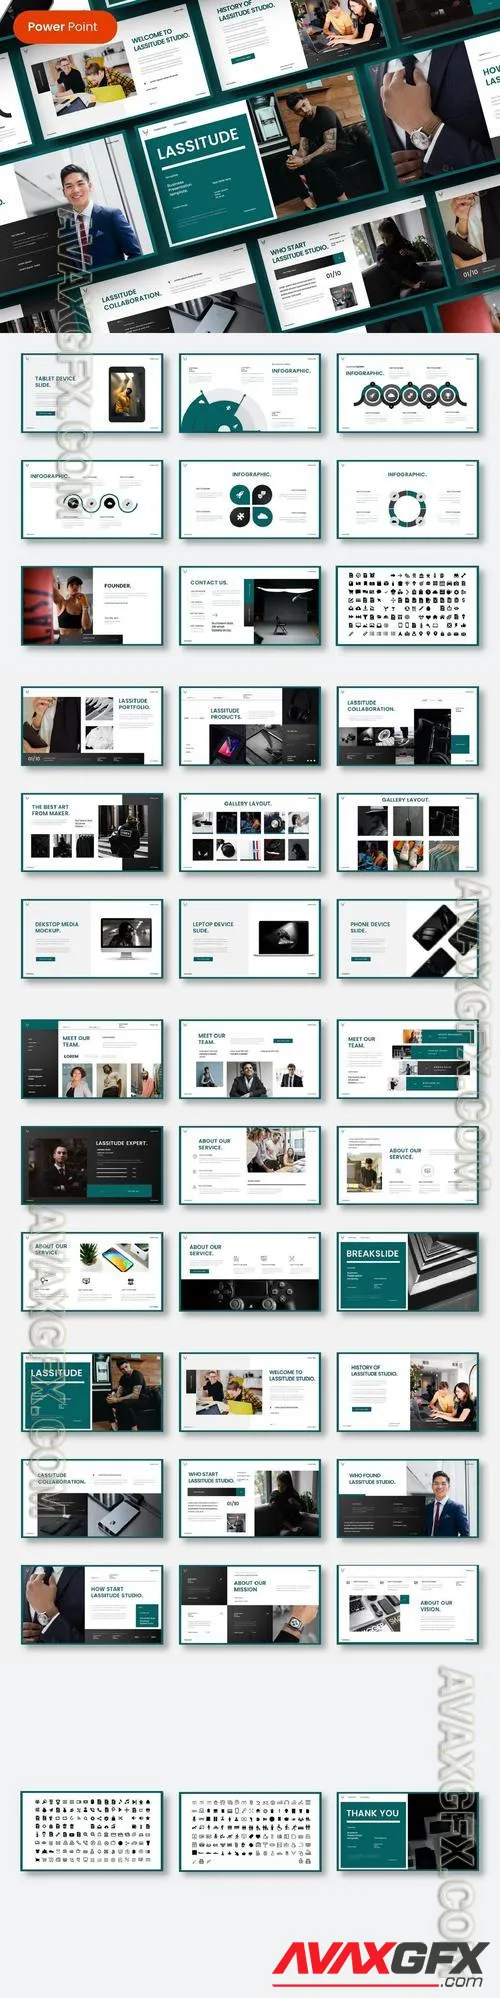 Lassitude - Business PowerPoint Template